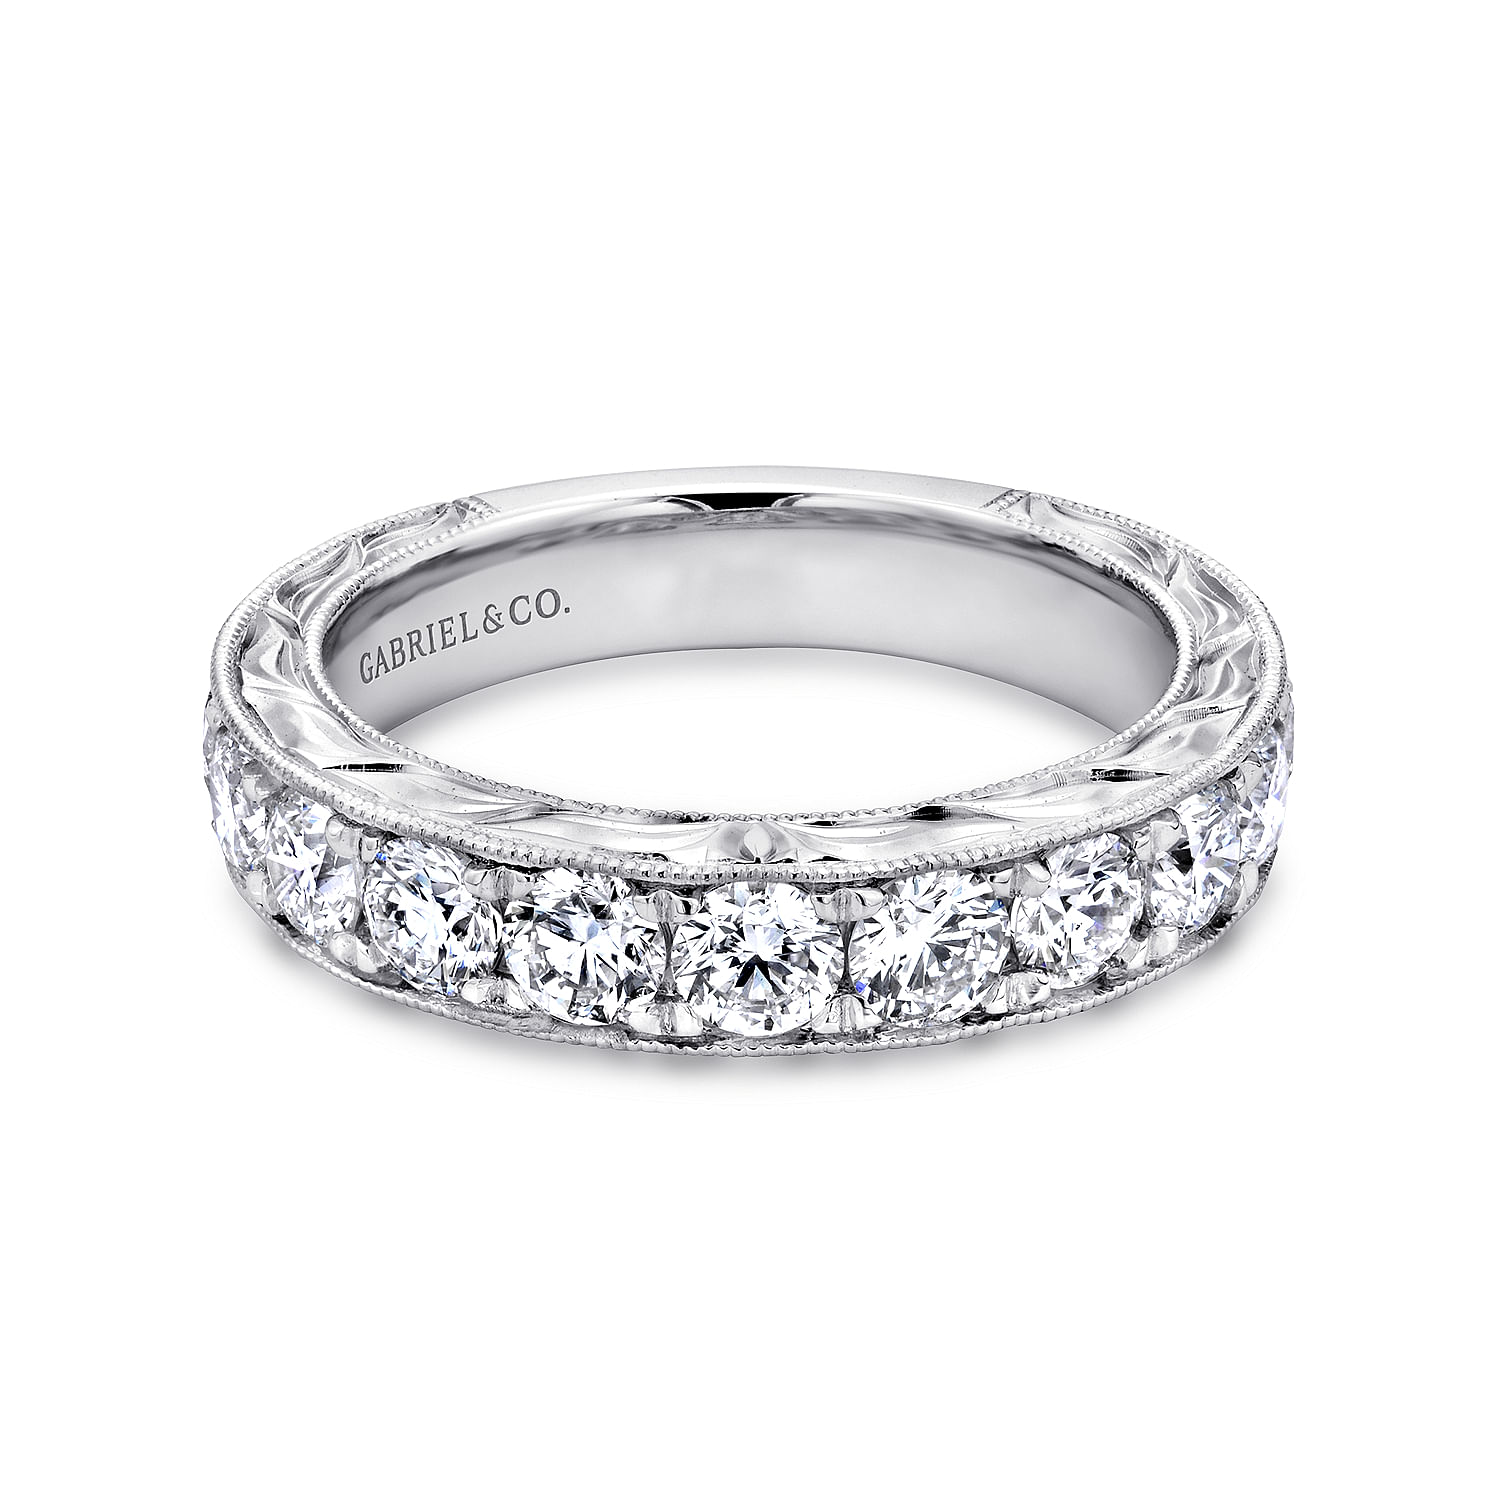 Caserta - Vintage Inspired 14K White Gold Channel Set Diamond Wedding Band with Engraving